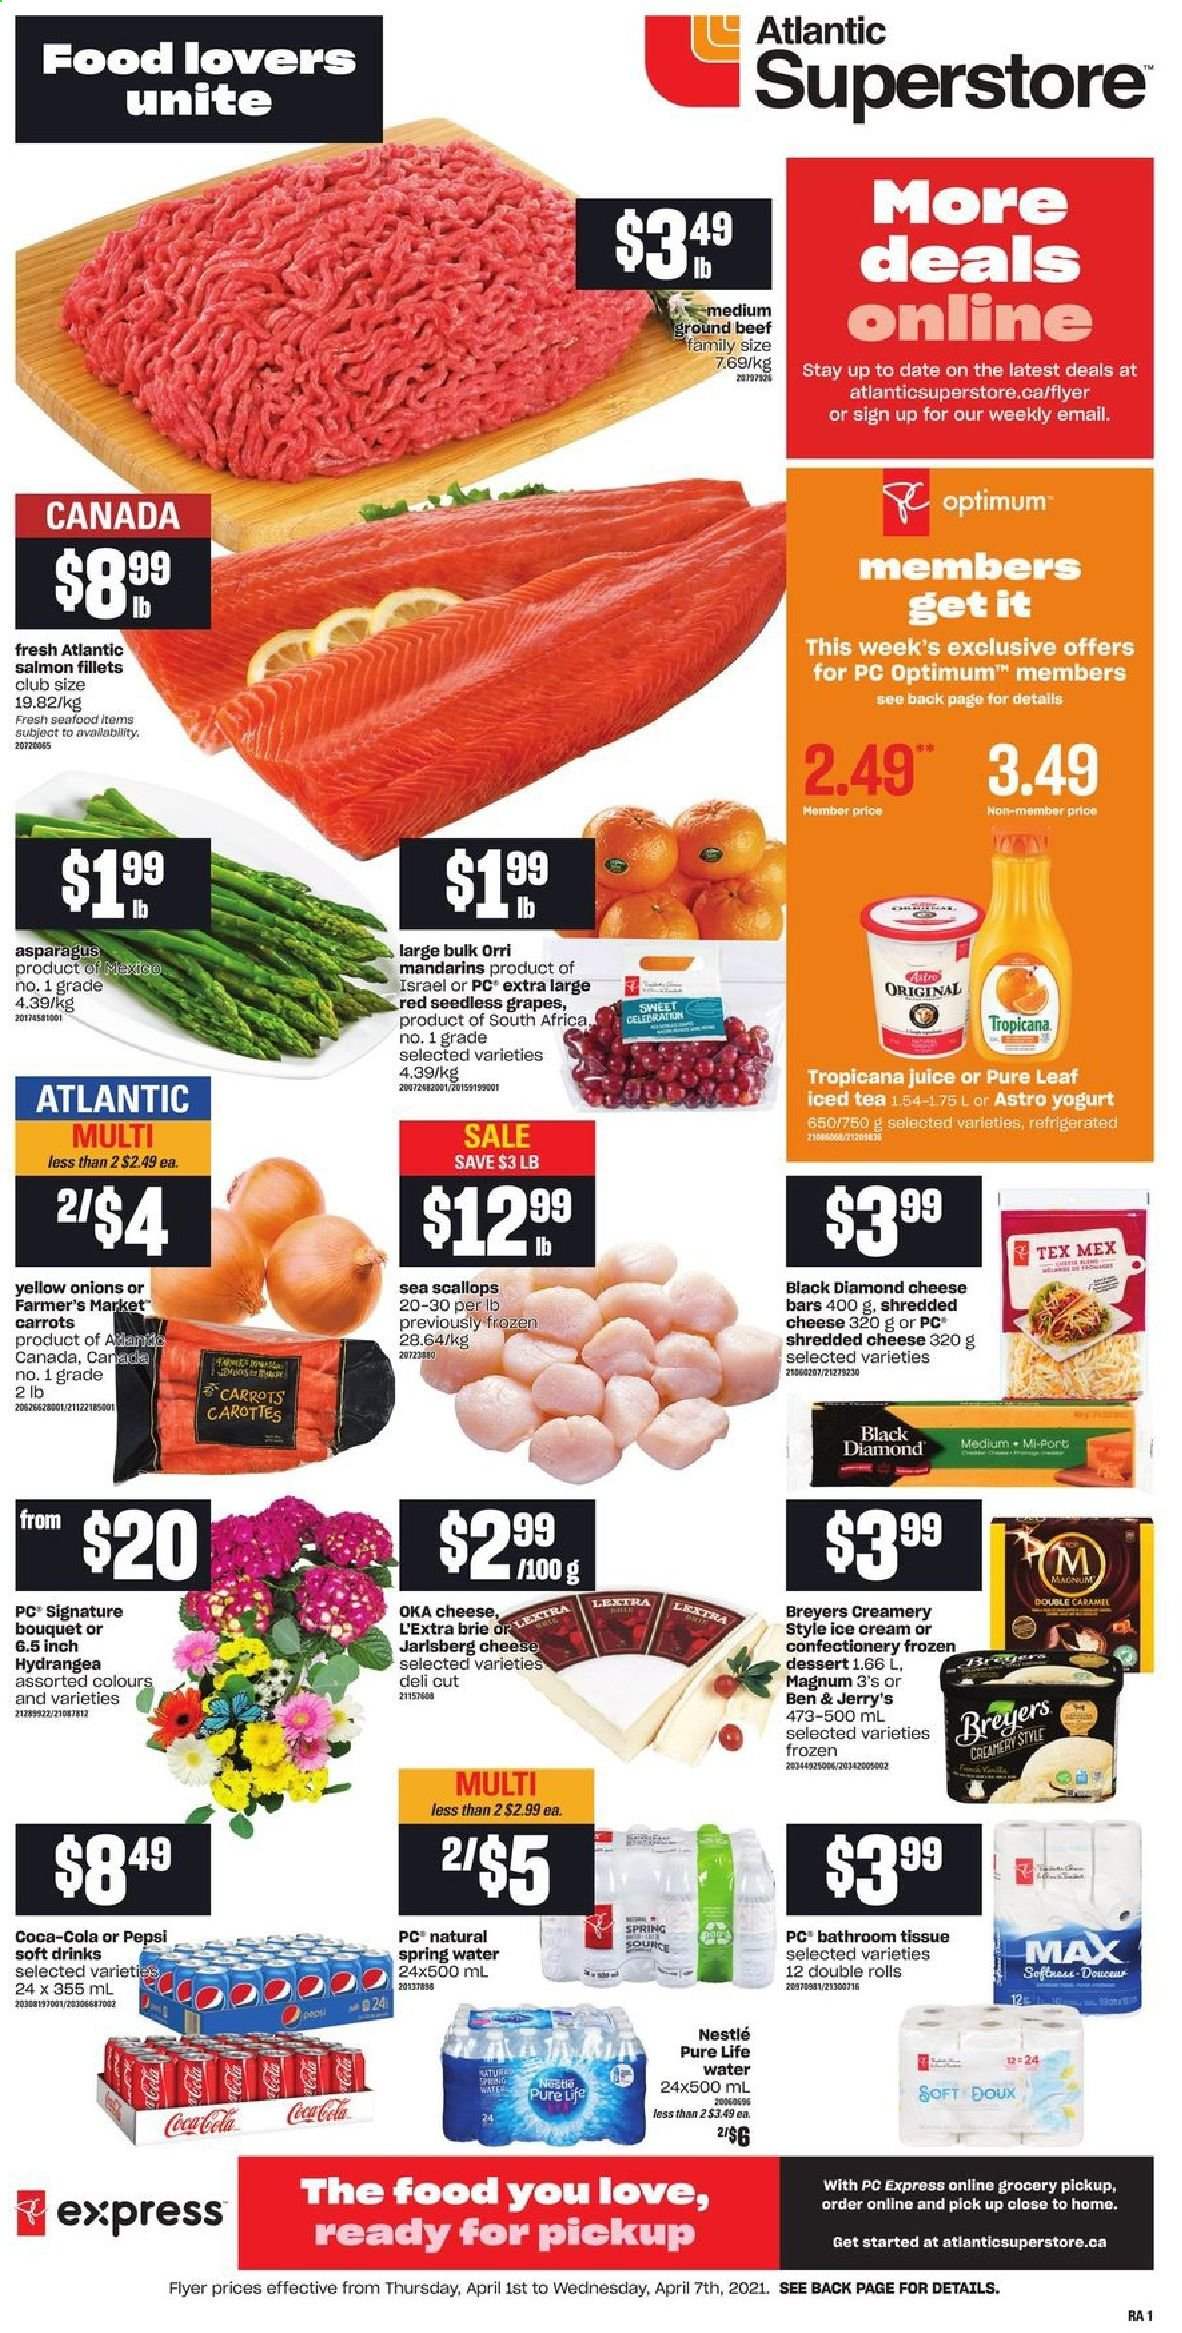 thumbnail - Atlantic Superstore Flyer - April 01, 2021 - April 07, 2021 - Sales products - asparagus, carrots, grapes, mandarines, seedless grapes, salmon, salmon fillet, scallops, seafood, shredded cheese, brie, yoghurt, Magnum, ice cream, Ben & Jerry's, Coca-Cola, Pepsi, juice, ice tea, soft drink, spring water, Pure Life Water, Pure Leaf, beef meat, ground beef, bath tissue, Optimum, bouquet. Page 1.